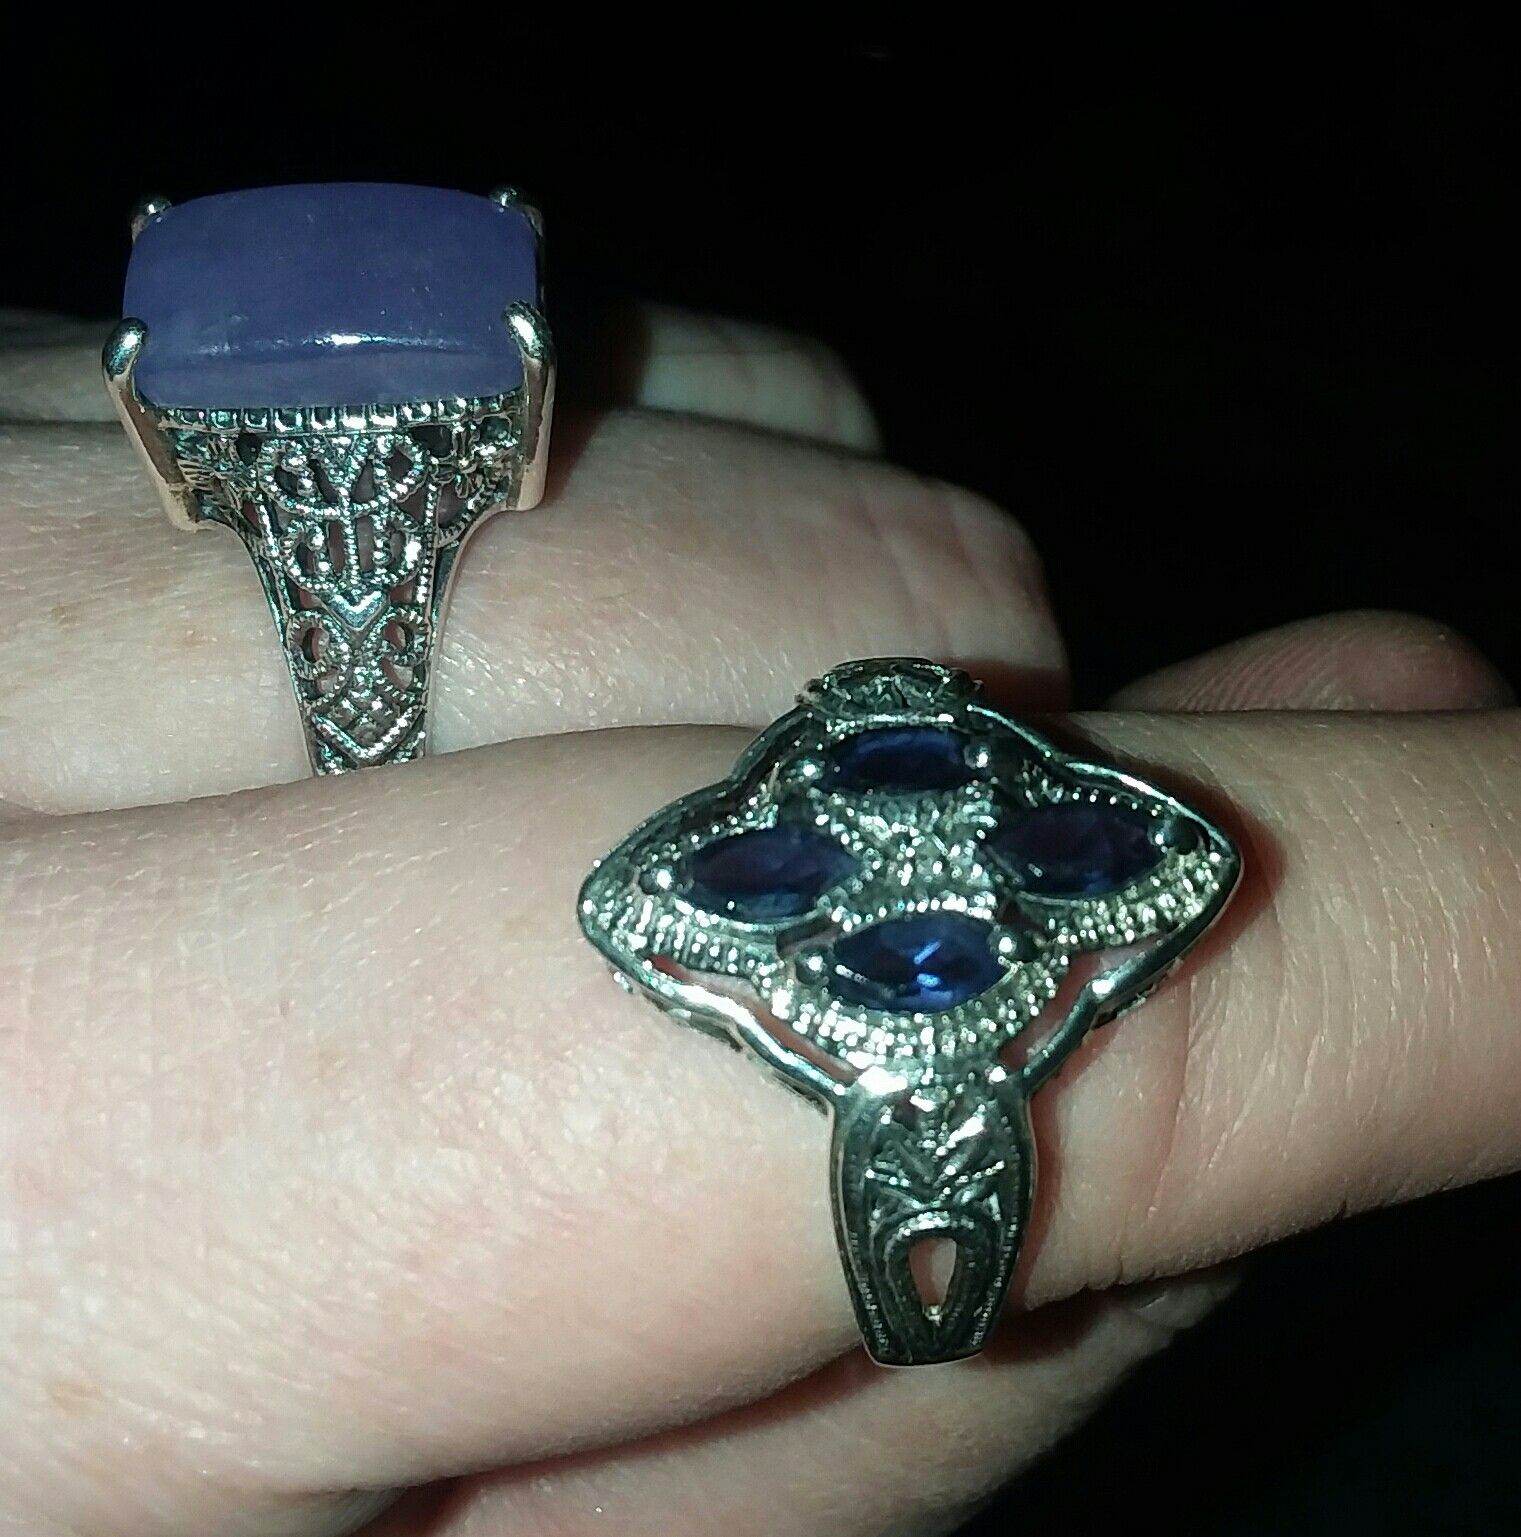 Size 9 sterling silver rings $10 each